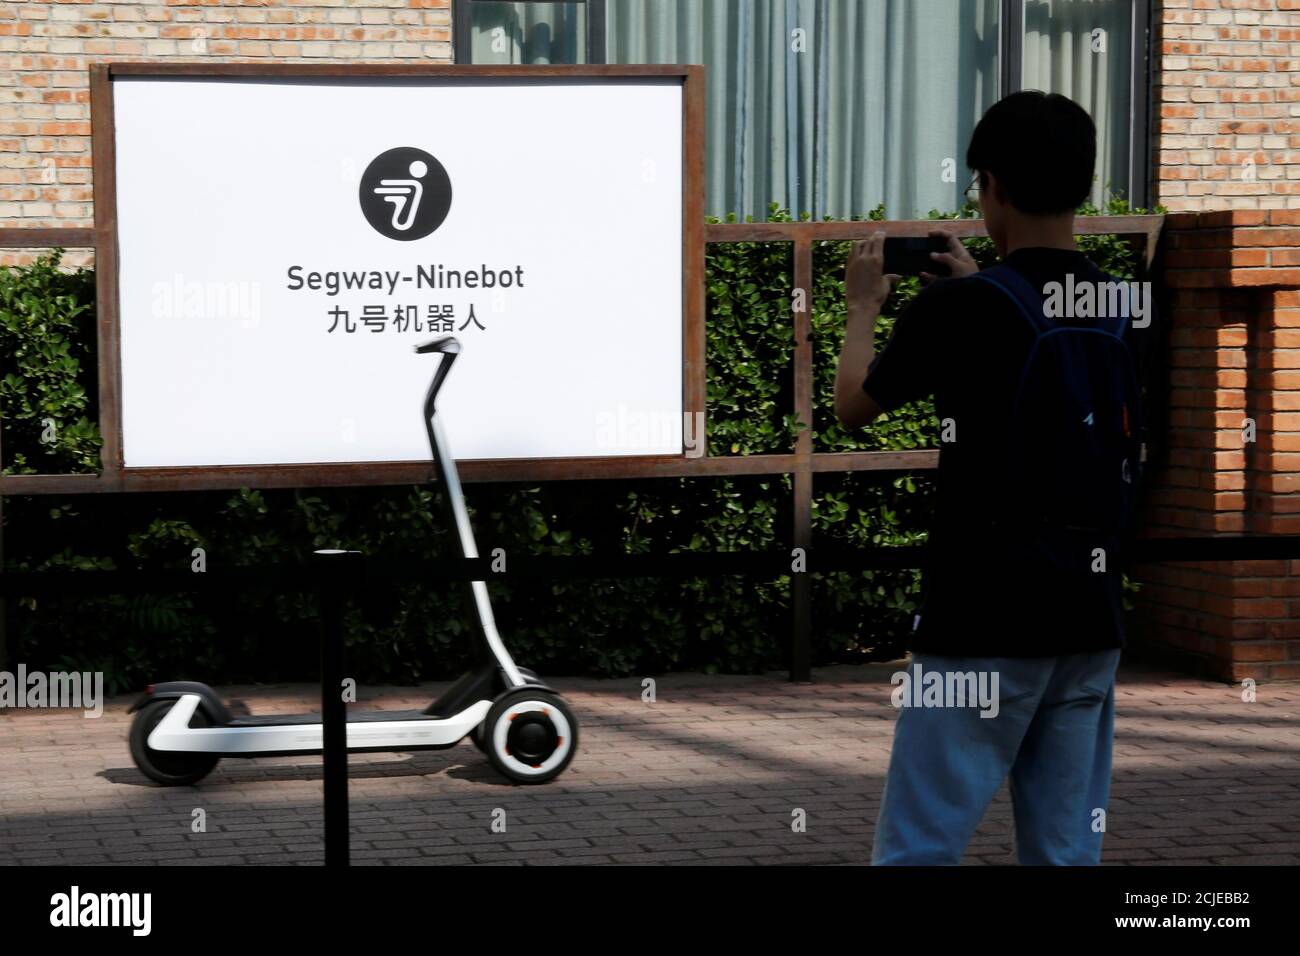 A man takes pictures of a semi-autonomous scooter KickScooter T60 that can  return itself to charging stations without a driver, at a Segway-Ninebot  product launch event in Beijing, China August 16, 2019.